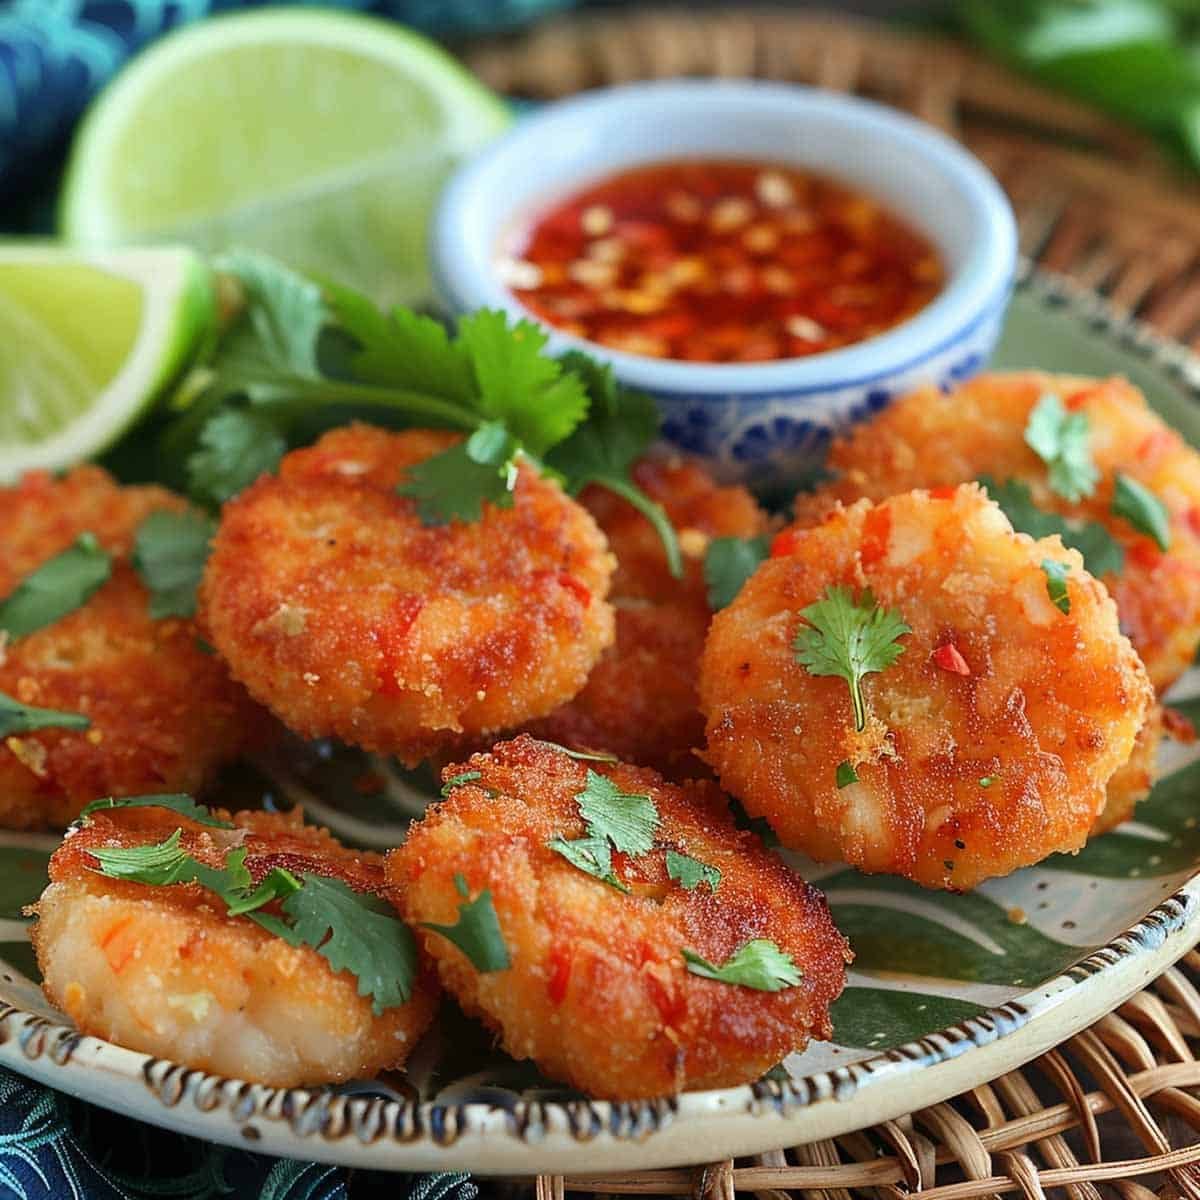 Plate of golden brown Thai Shrimp Cakes (Tod Mun Goong) served with Sweet Thai Chili Dipping Sauce.